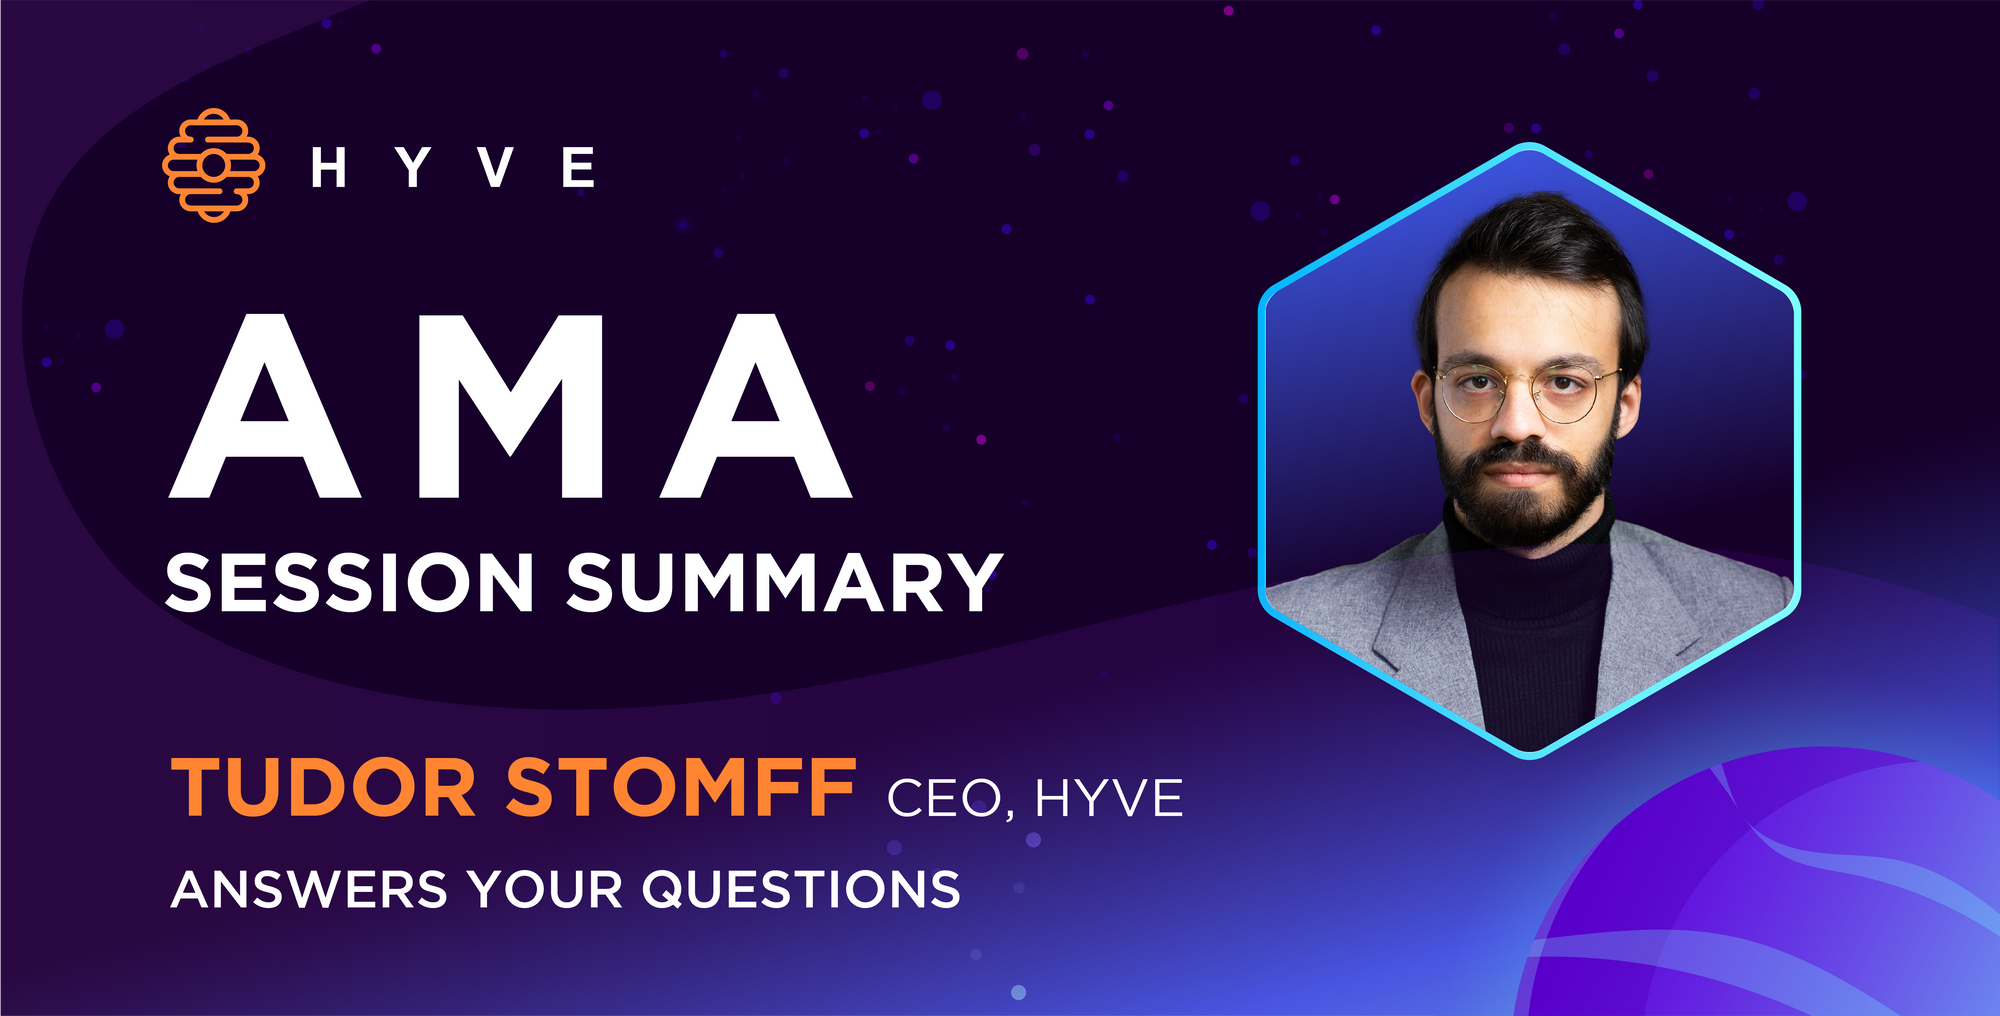 AMA session summary - CEO Tudor Stomff answers your questions